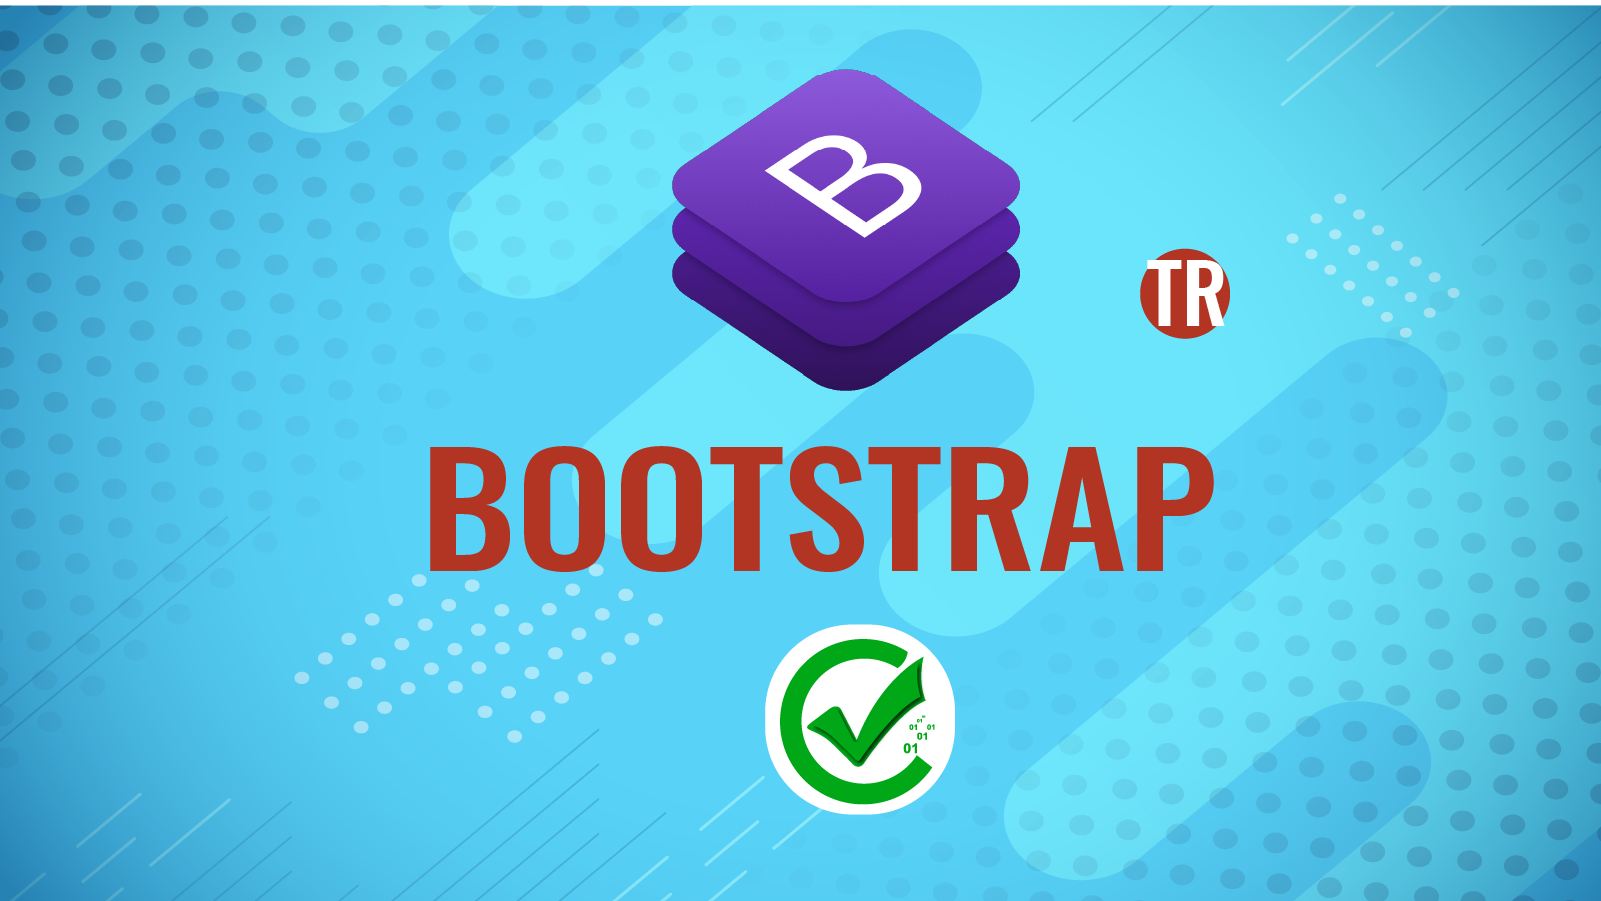 BOOTSTRAP 153 154 155 156 178